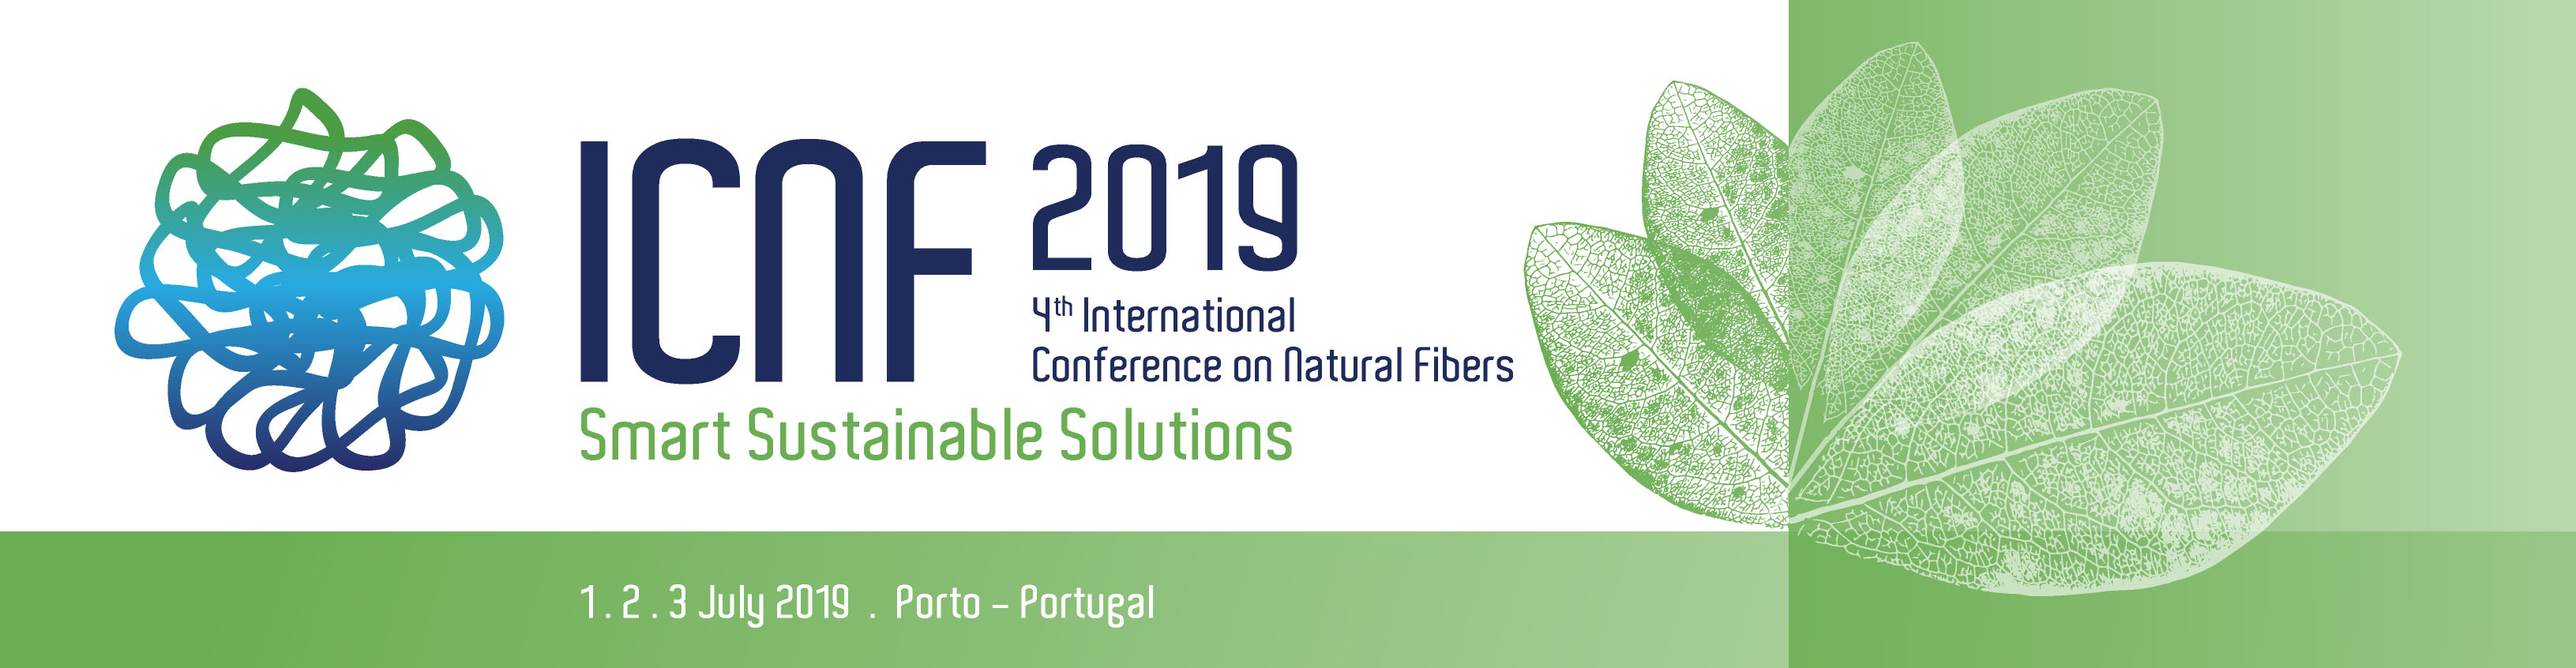 ICNF2019 banner